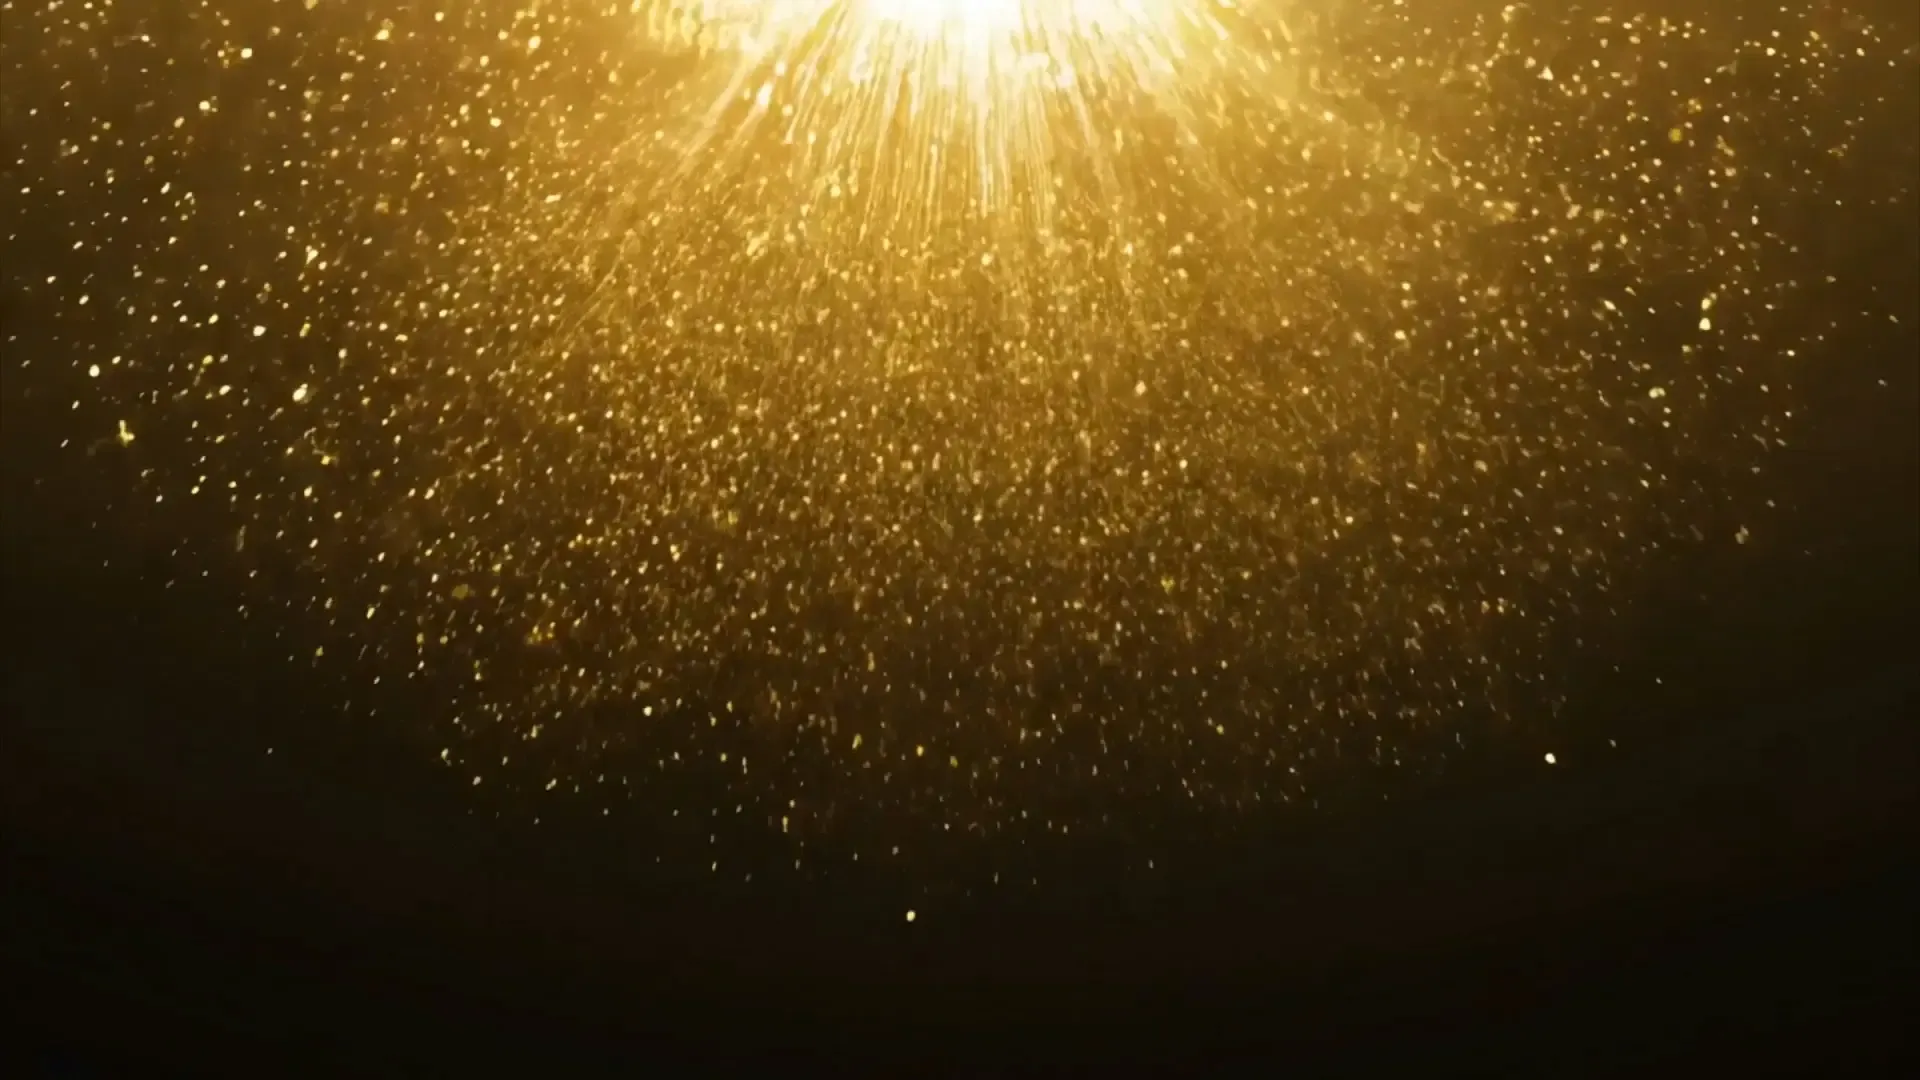 Rich Gold Sparkle Shower Deluxe Overlay for Videos